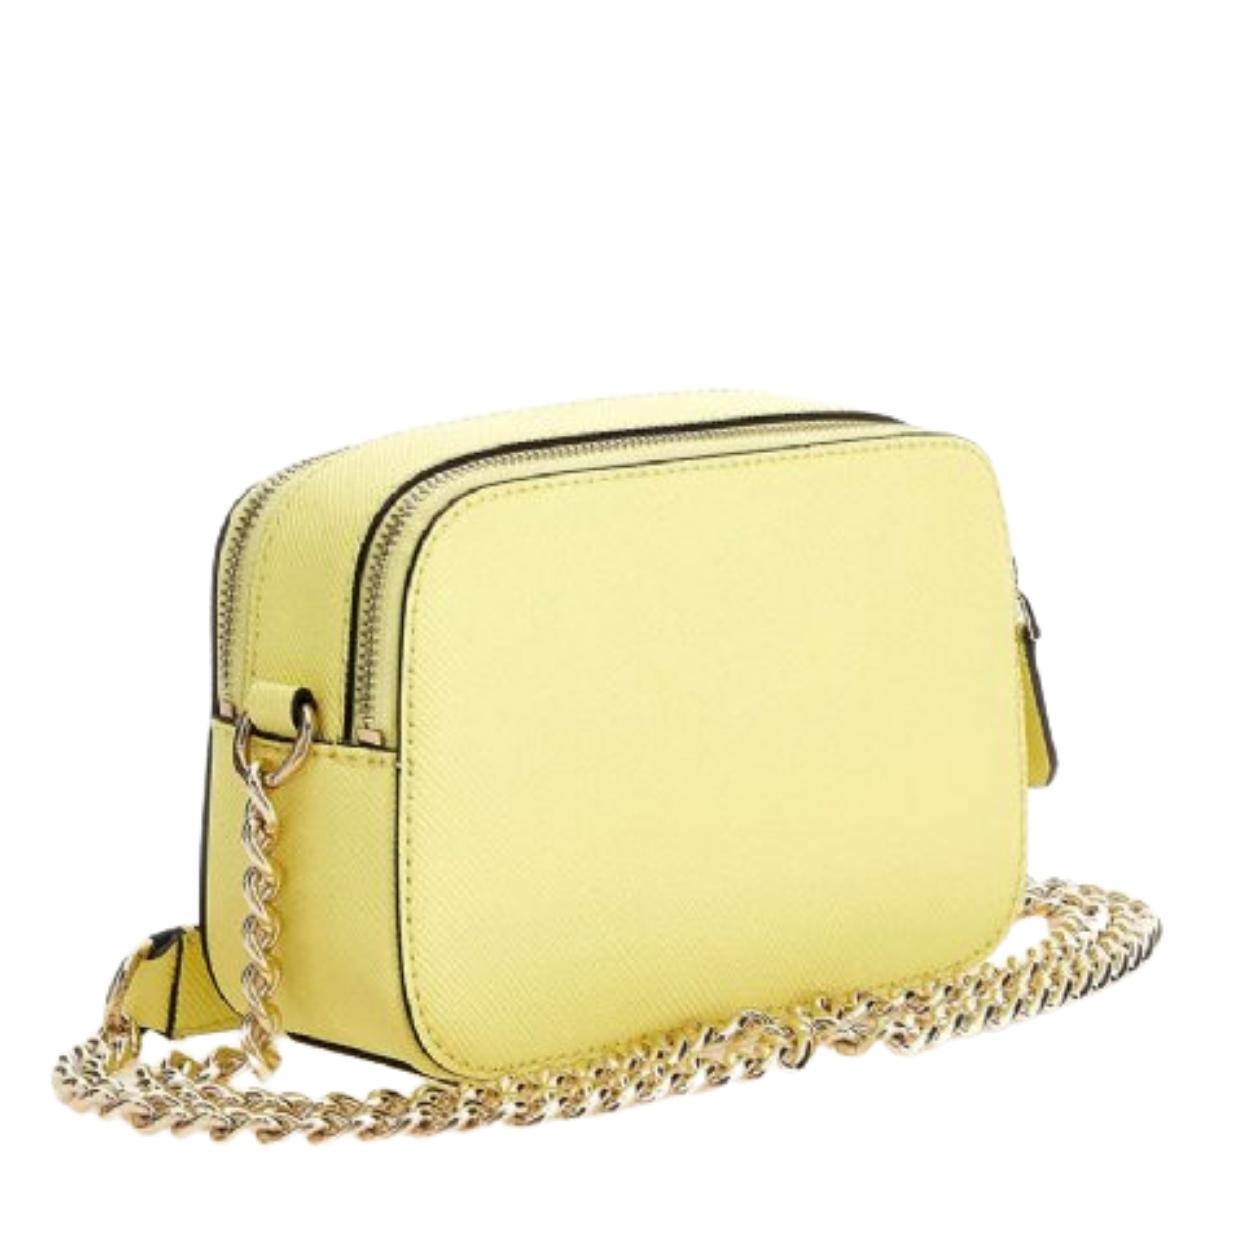 Guess Triangle Logo Noelle Saffiano Pale Yellow Crossbody